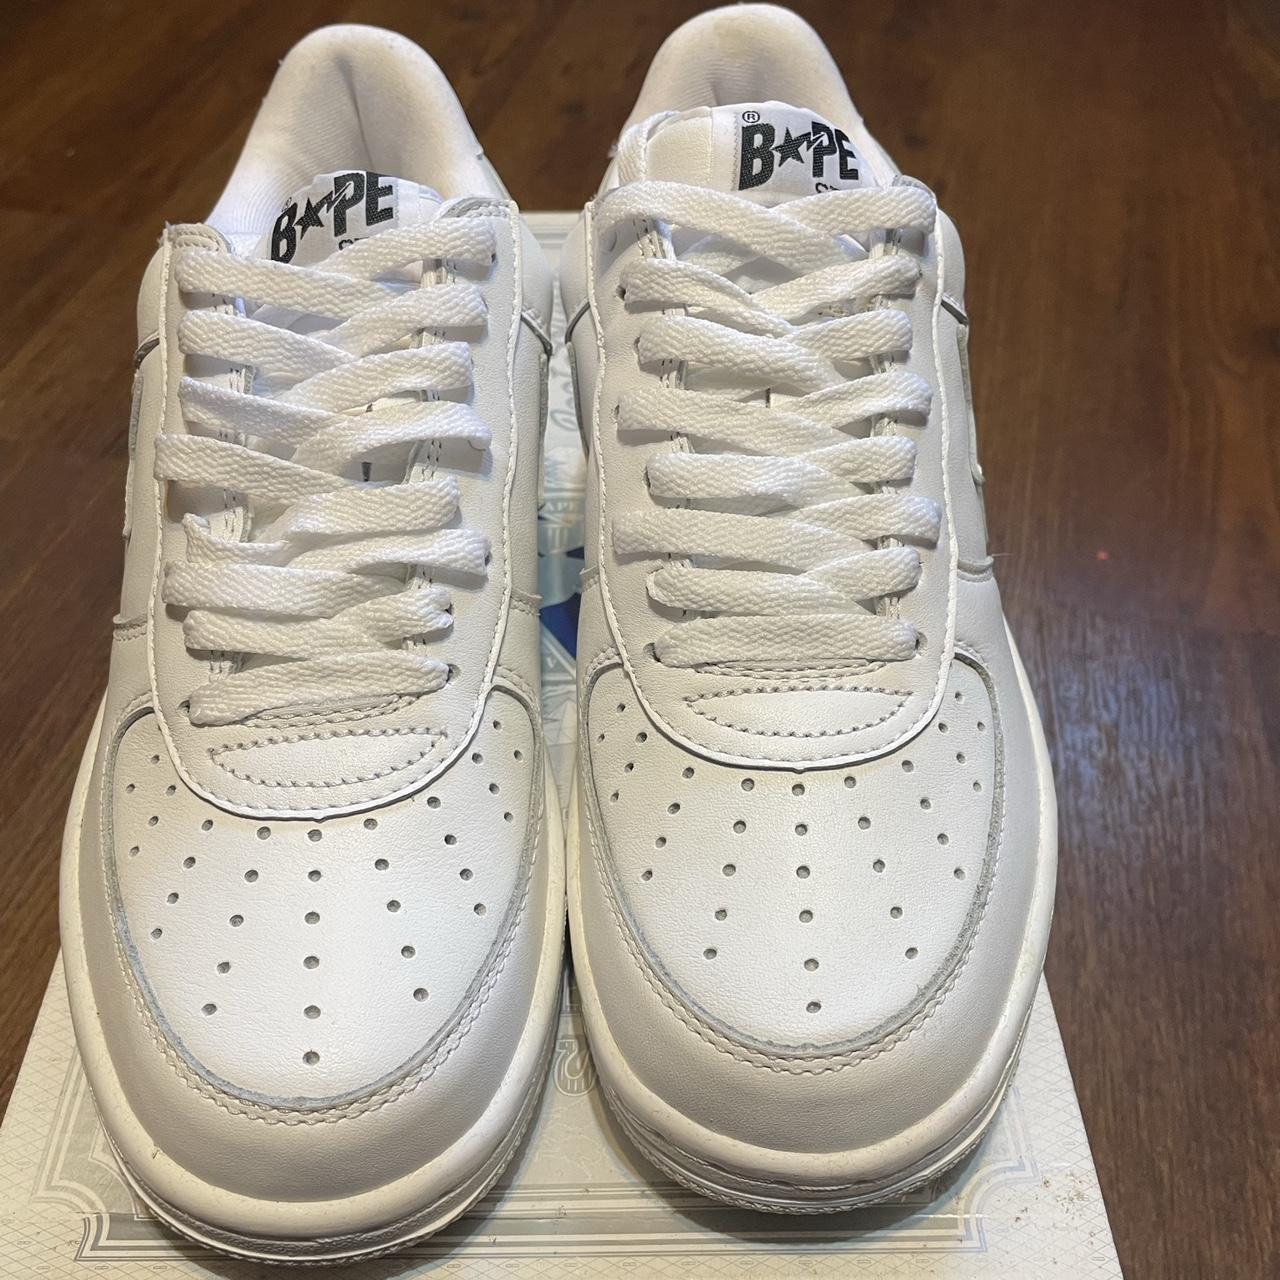 All white Bapestas from 2008 for sale! Size 8.5 DS.... - Depop